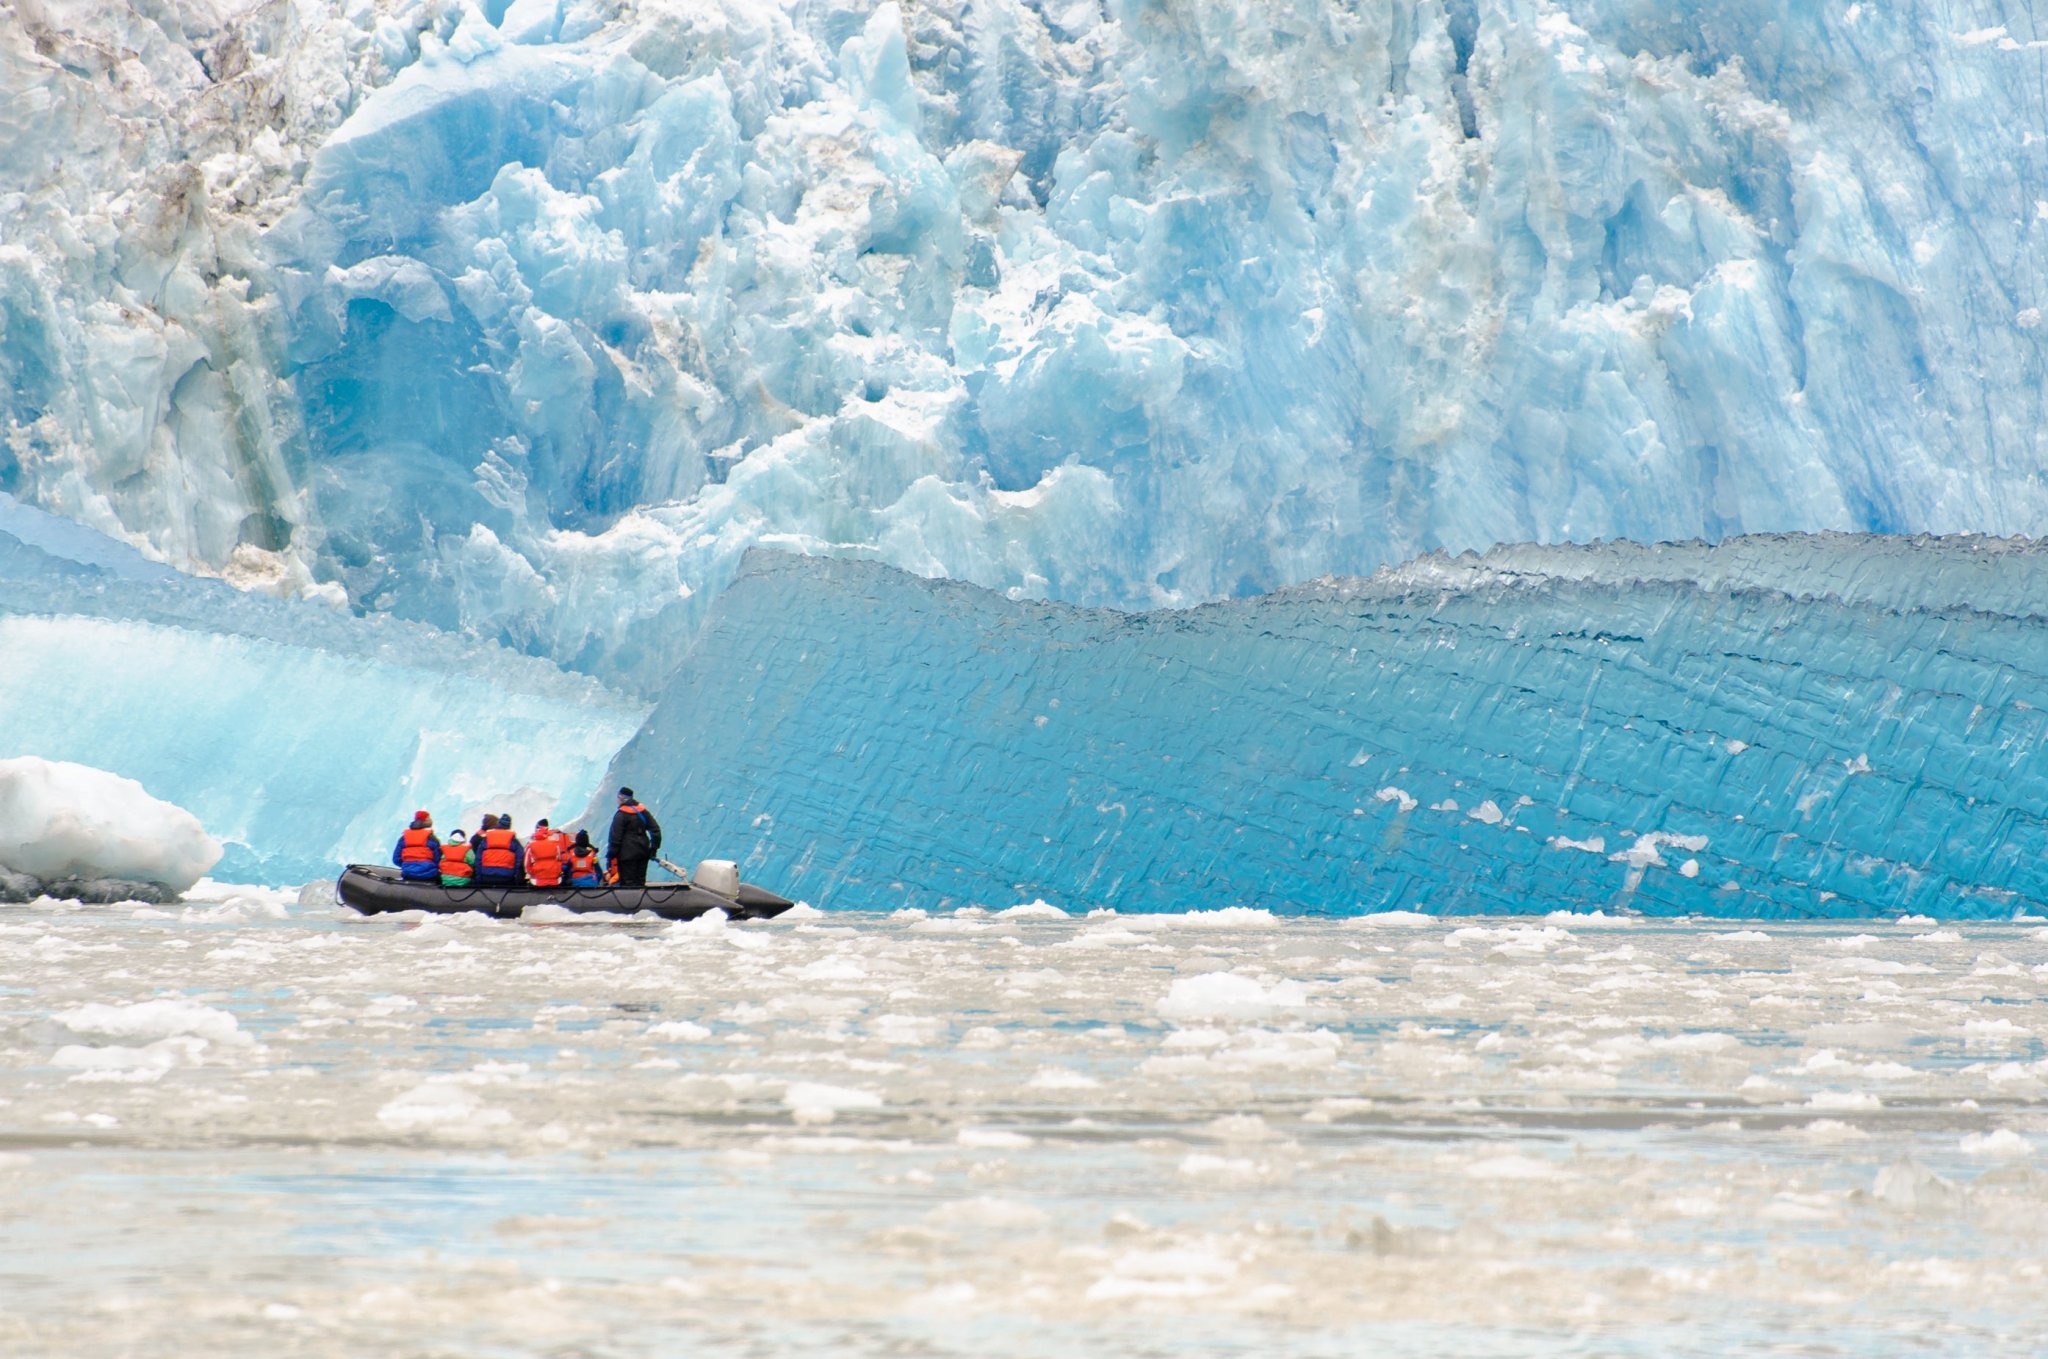 Alaska cruise guide: Best itineraries, planning tips and things to do